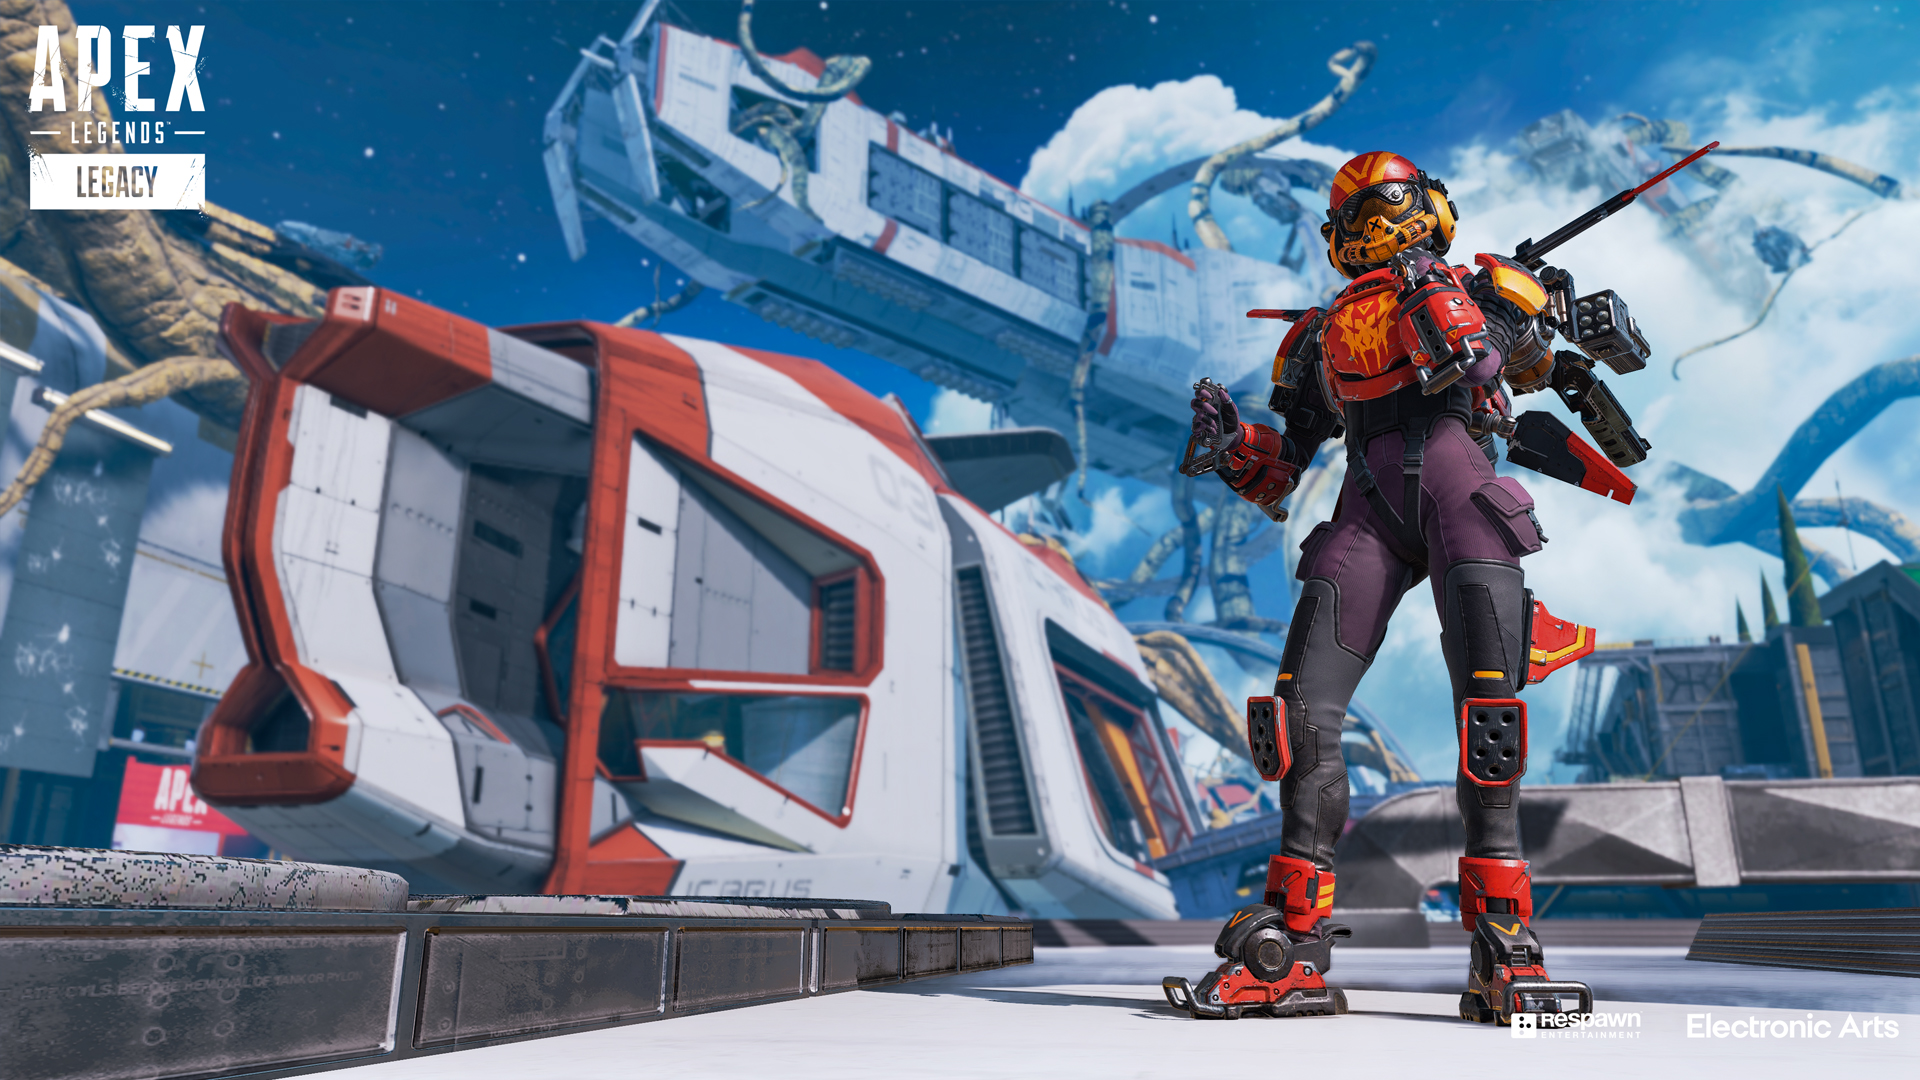 The best Valkyrie skins in Apex Legends